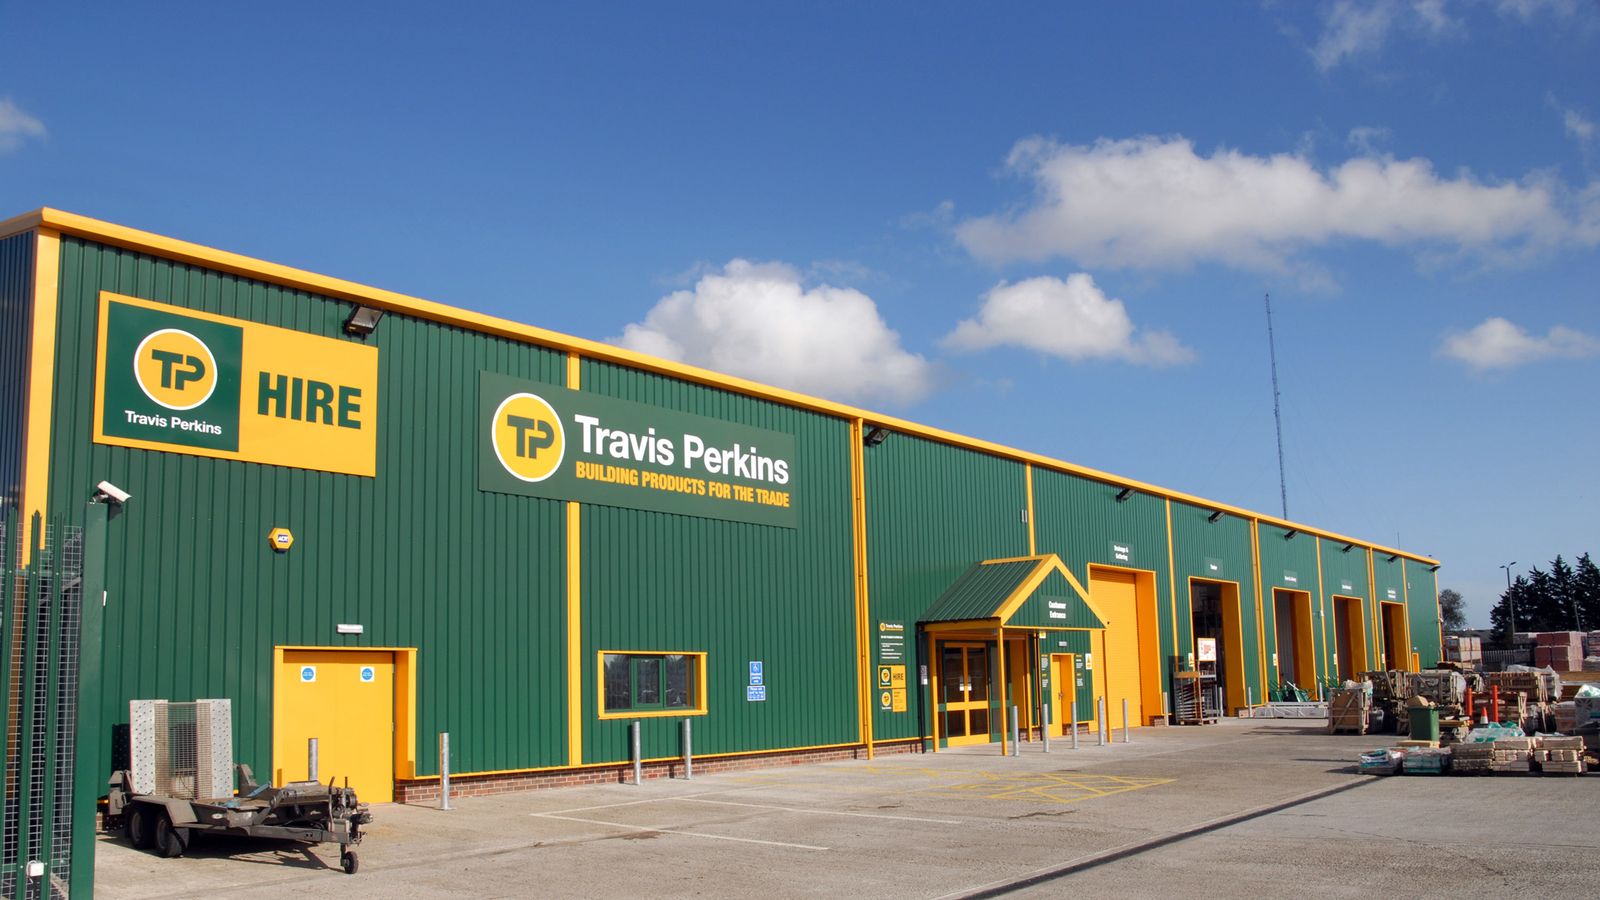 travis-perkins-to-axe-600-jobs-and-close-dozens-of-branches